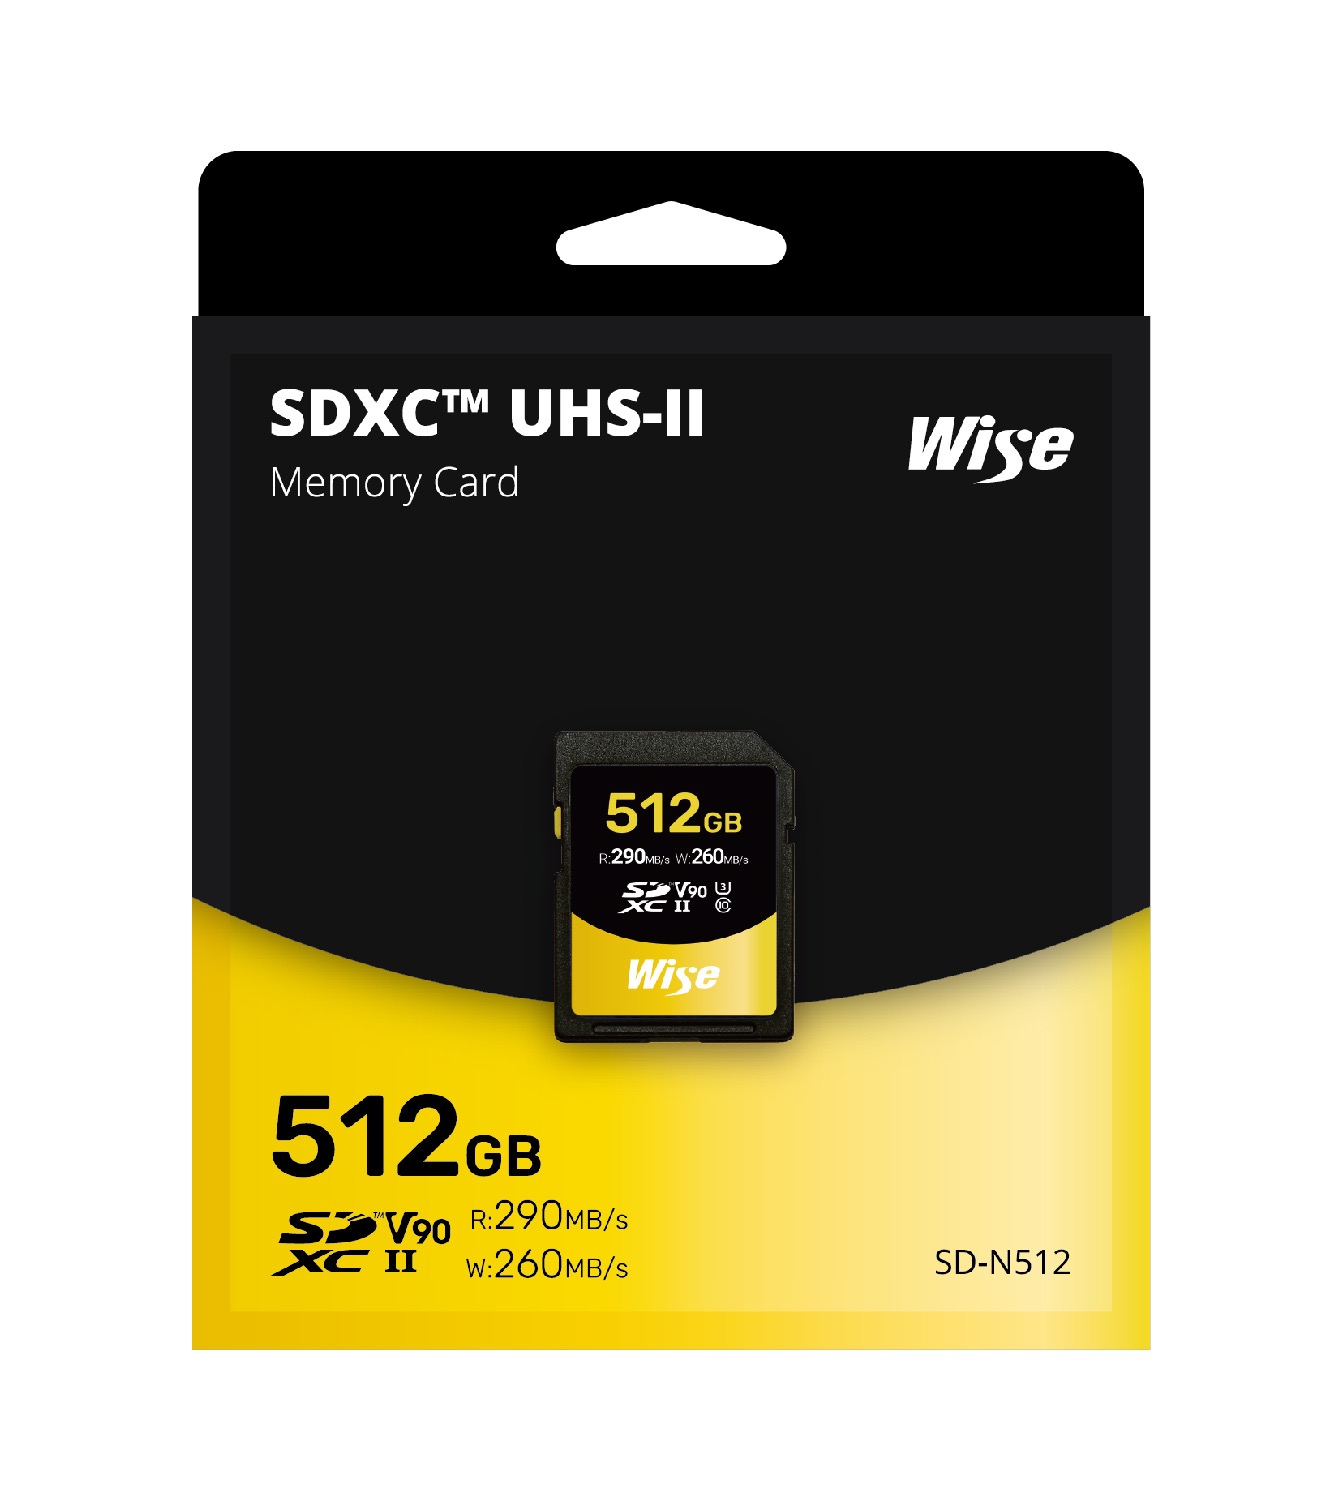 Wise Unveils the 128GB, 256GB, and 512GB V90 SDXC UHS-II Memory